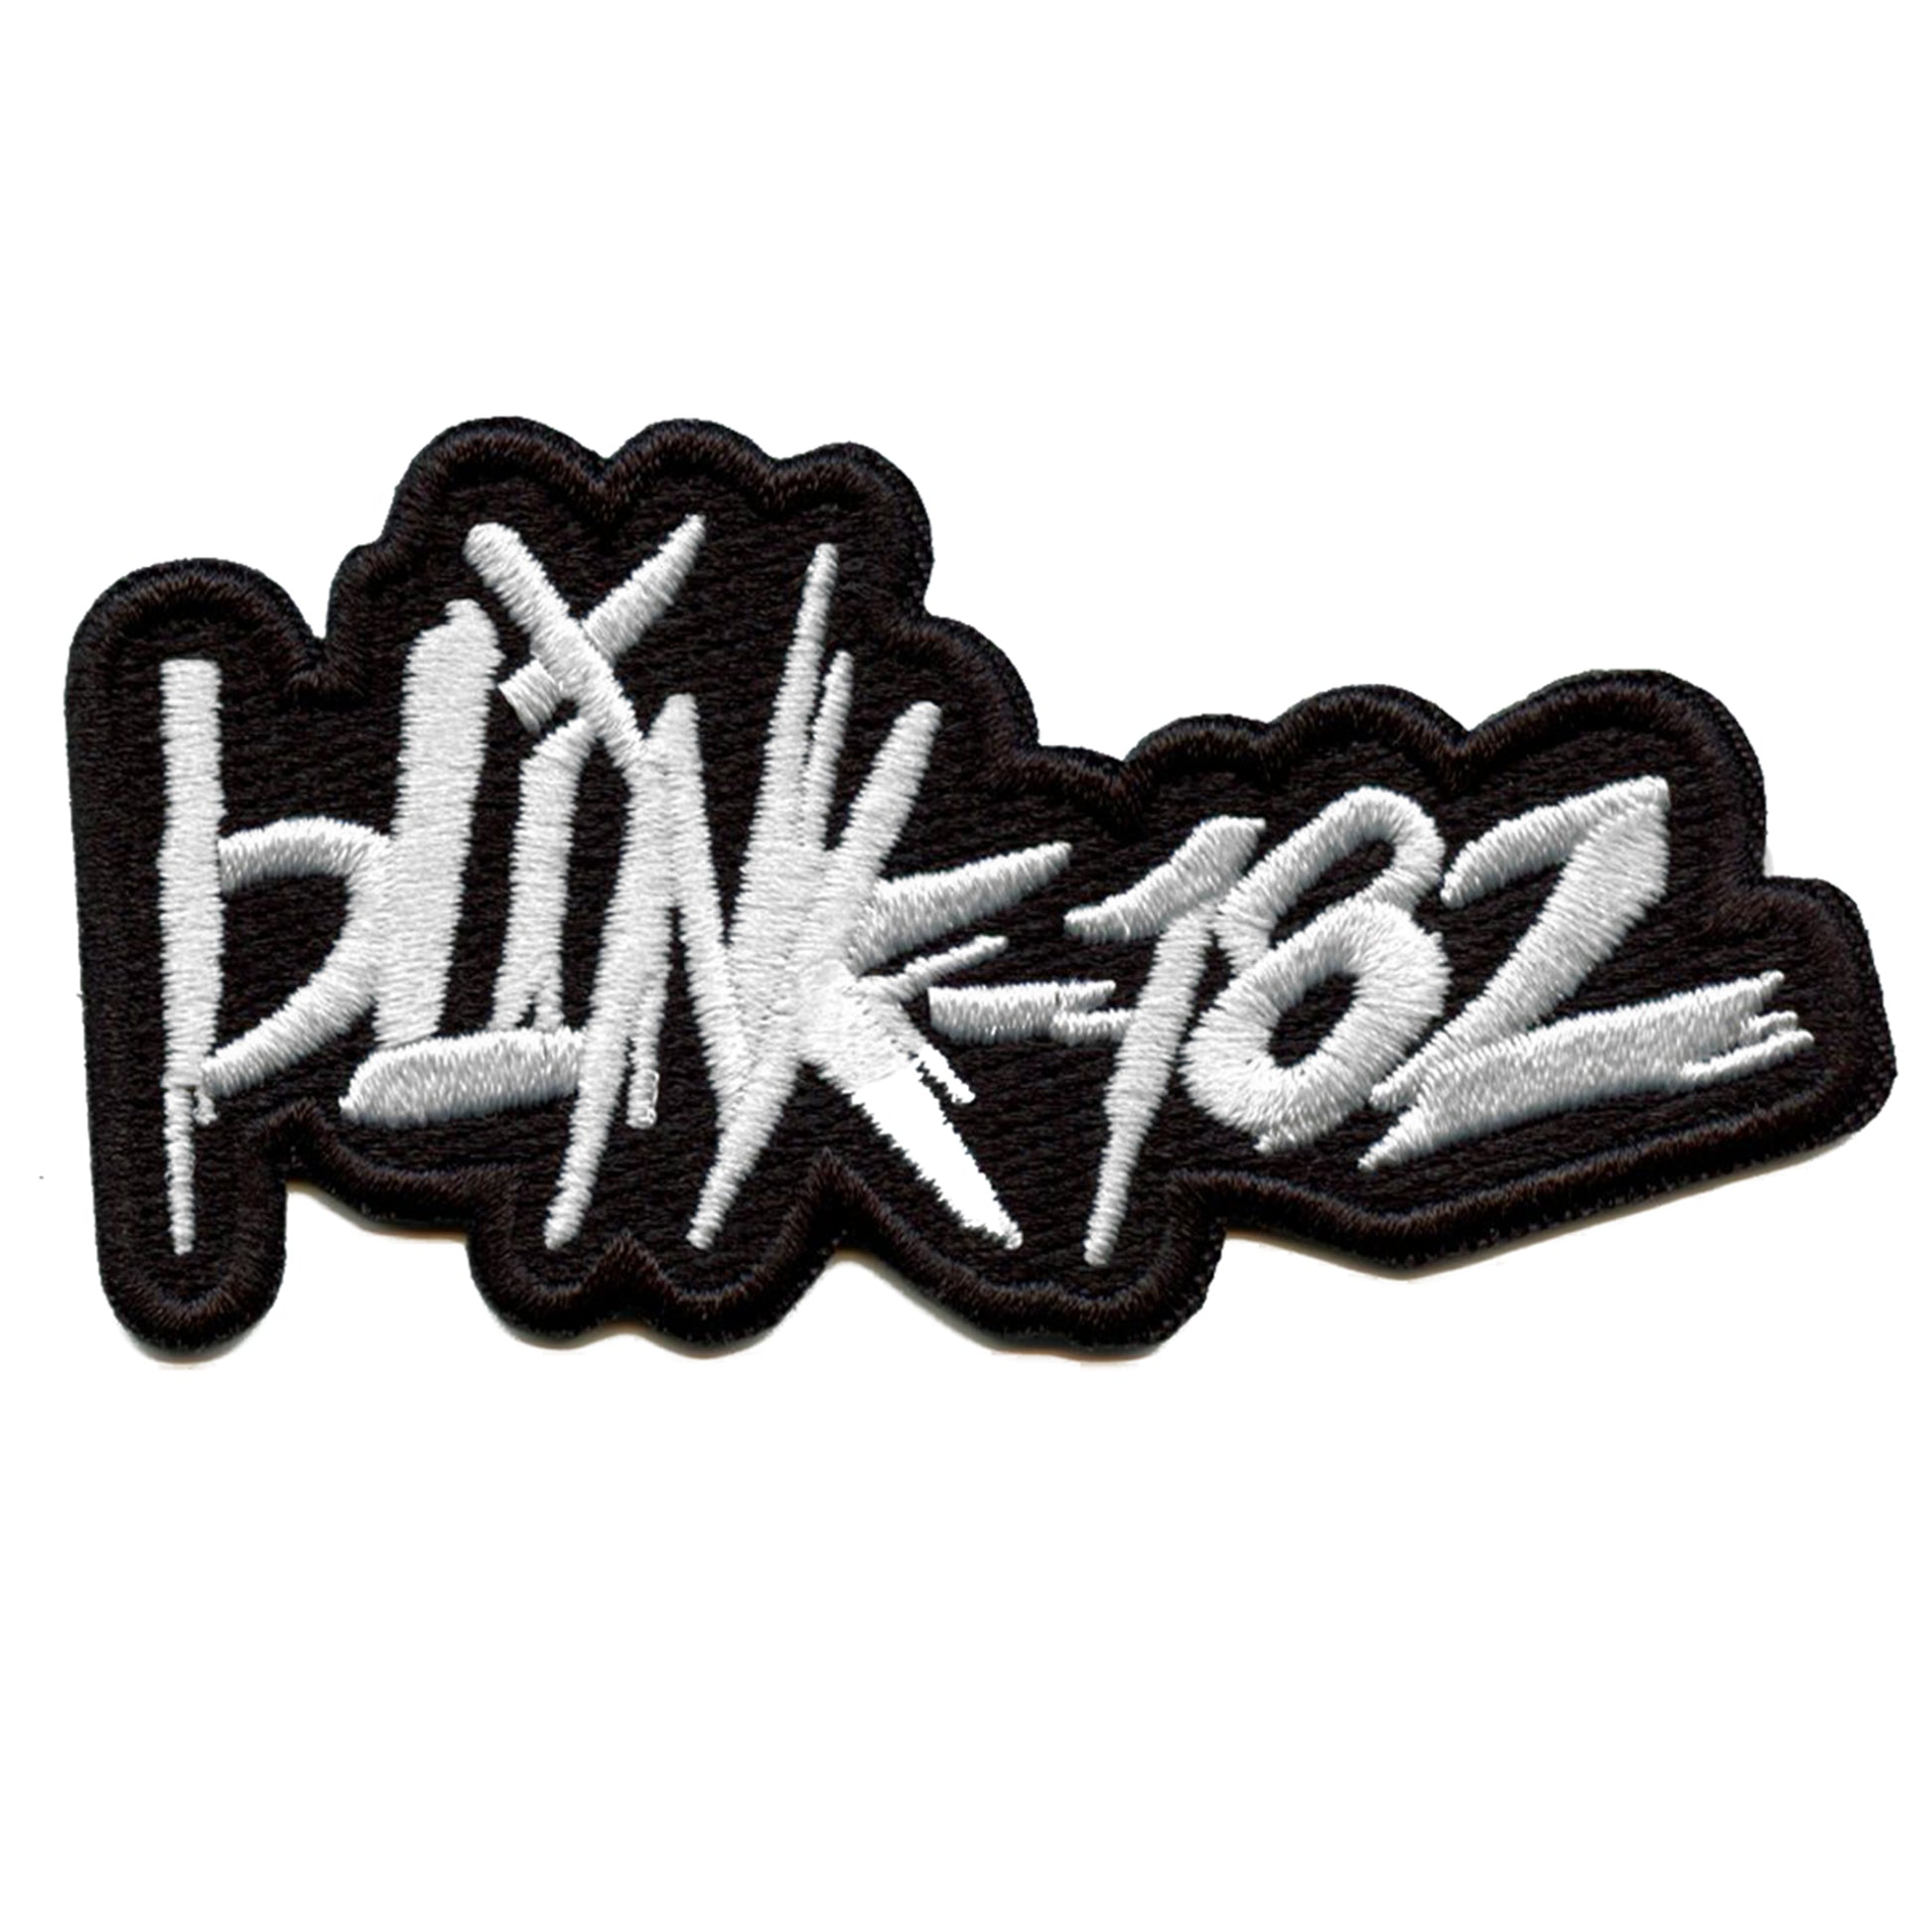 Blink-182 Scratch Logo Patch Punk Rock Band Embroidered Iron On – Patch  Collection